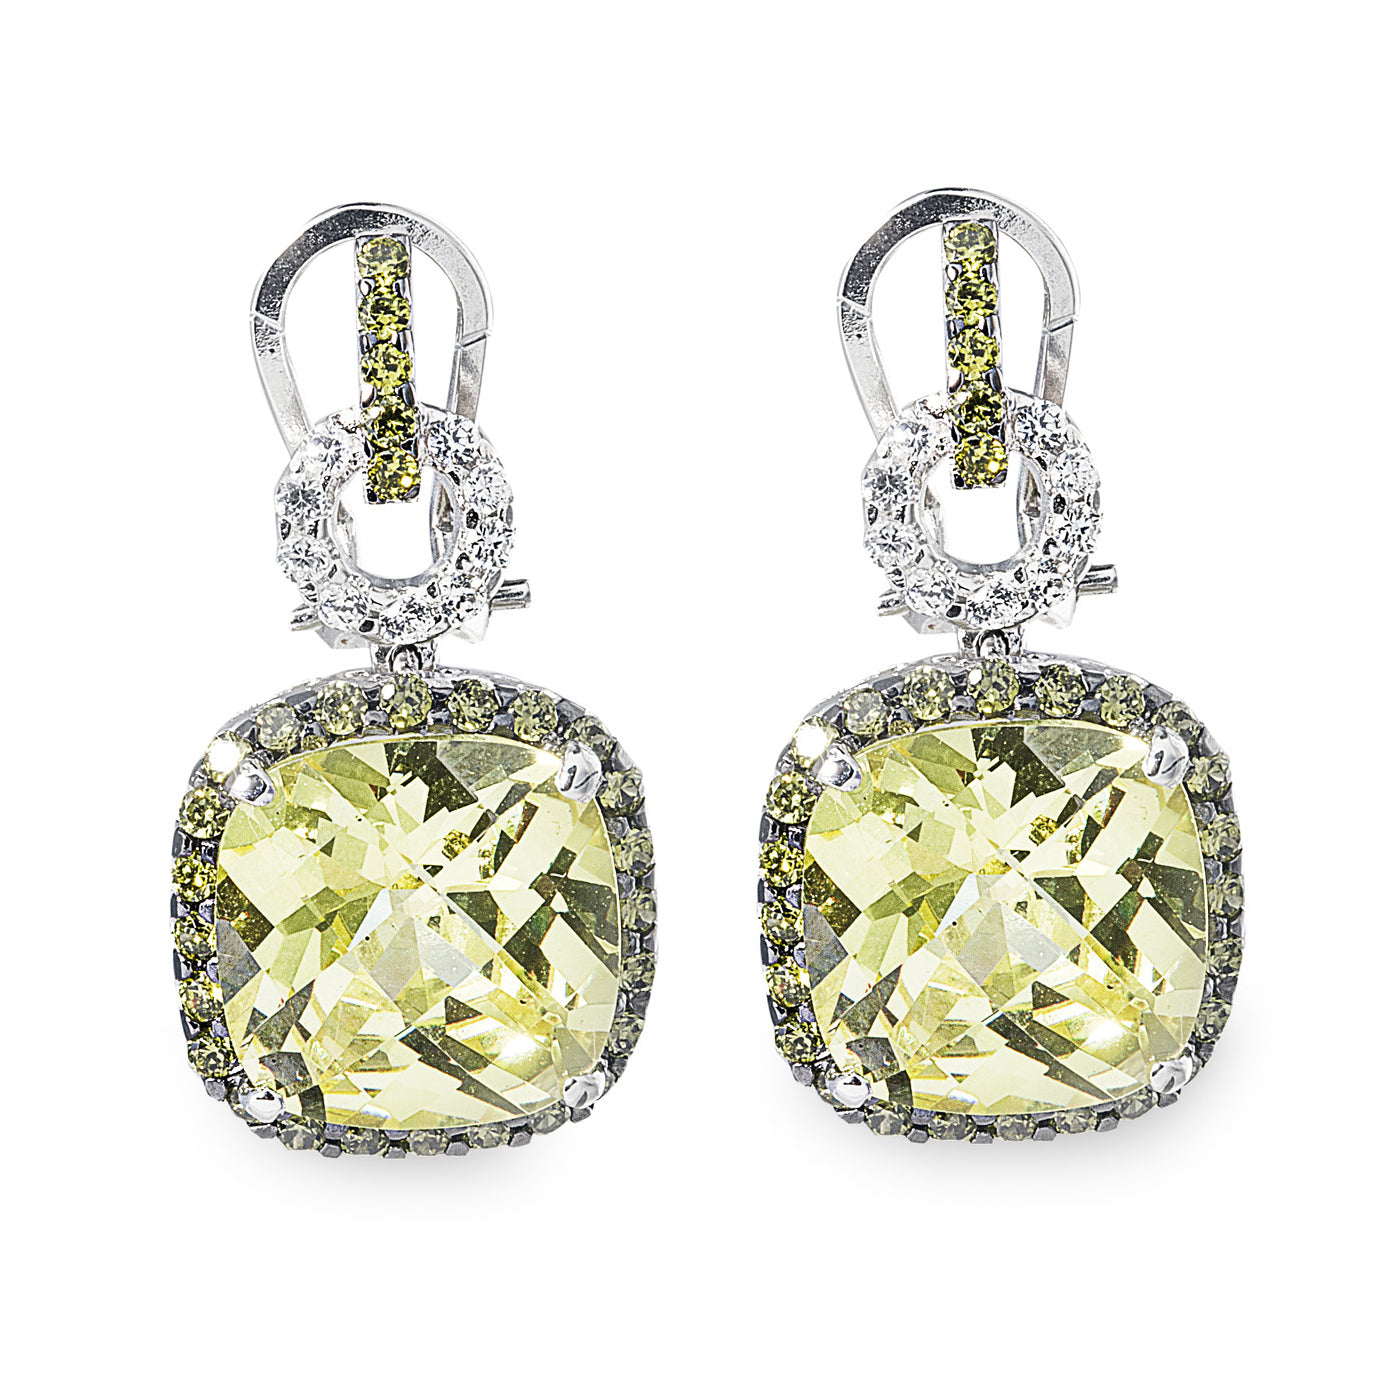 Antique Style 925 Sterling Silver drop earrings featuring a stunning Green Peridot stone surrounded by dainty black Cubic Zirconia Stones. 